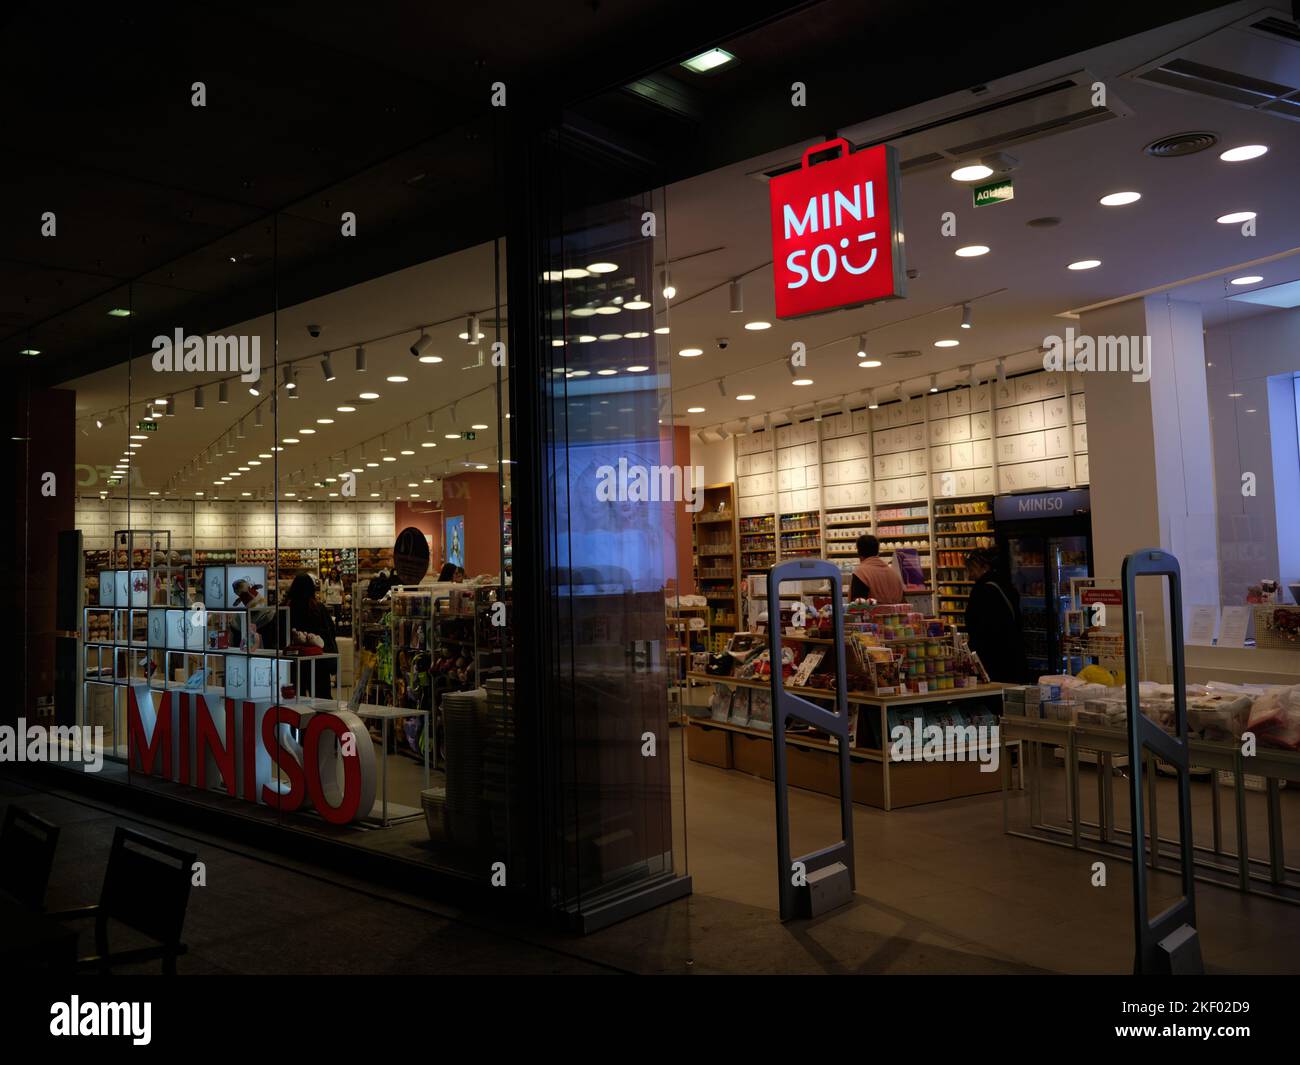 Miniso. Chinese low-cost retailer and variety store chain. Málaga, Spain. Stock Photo